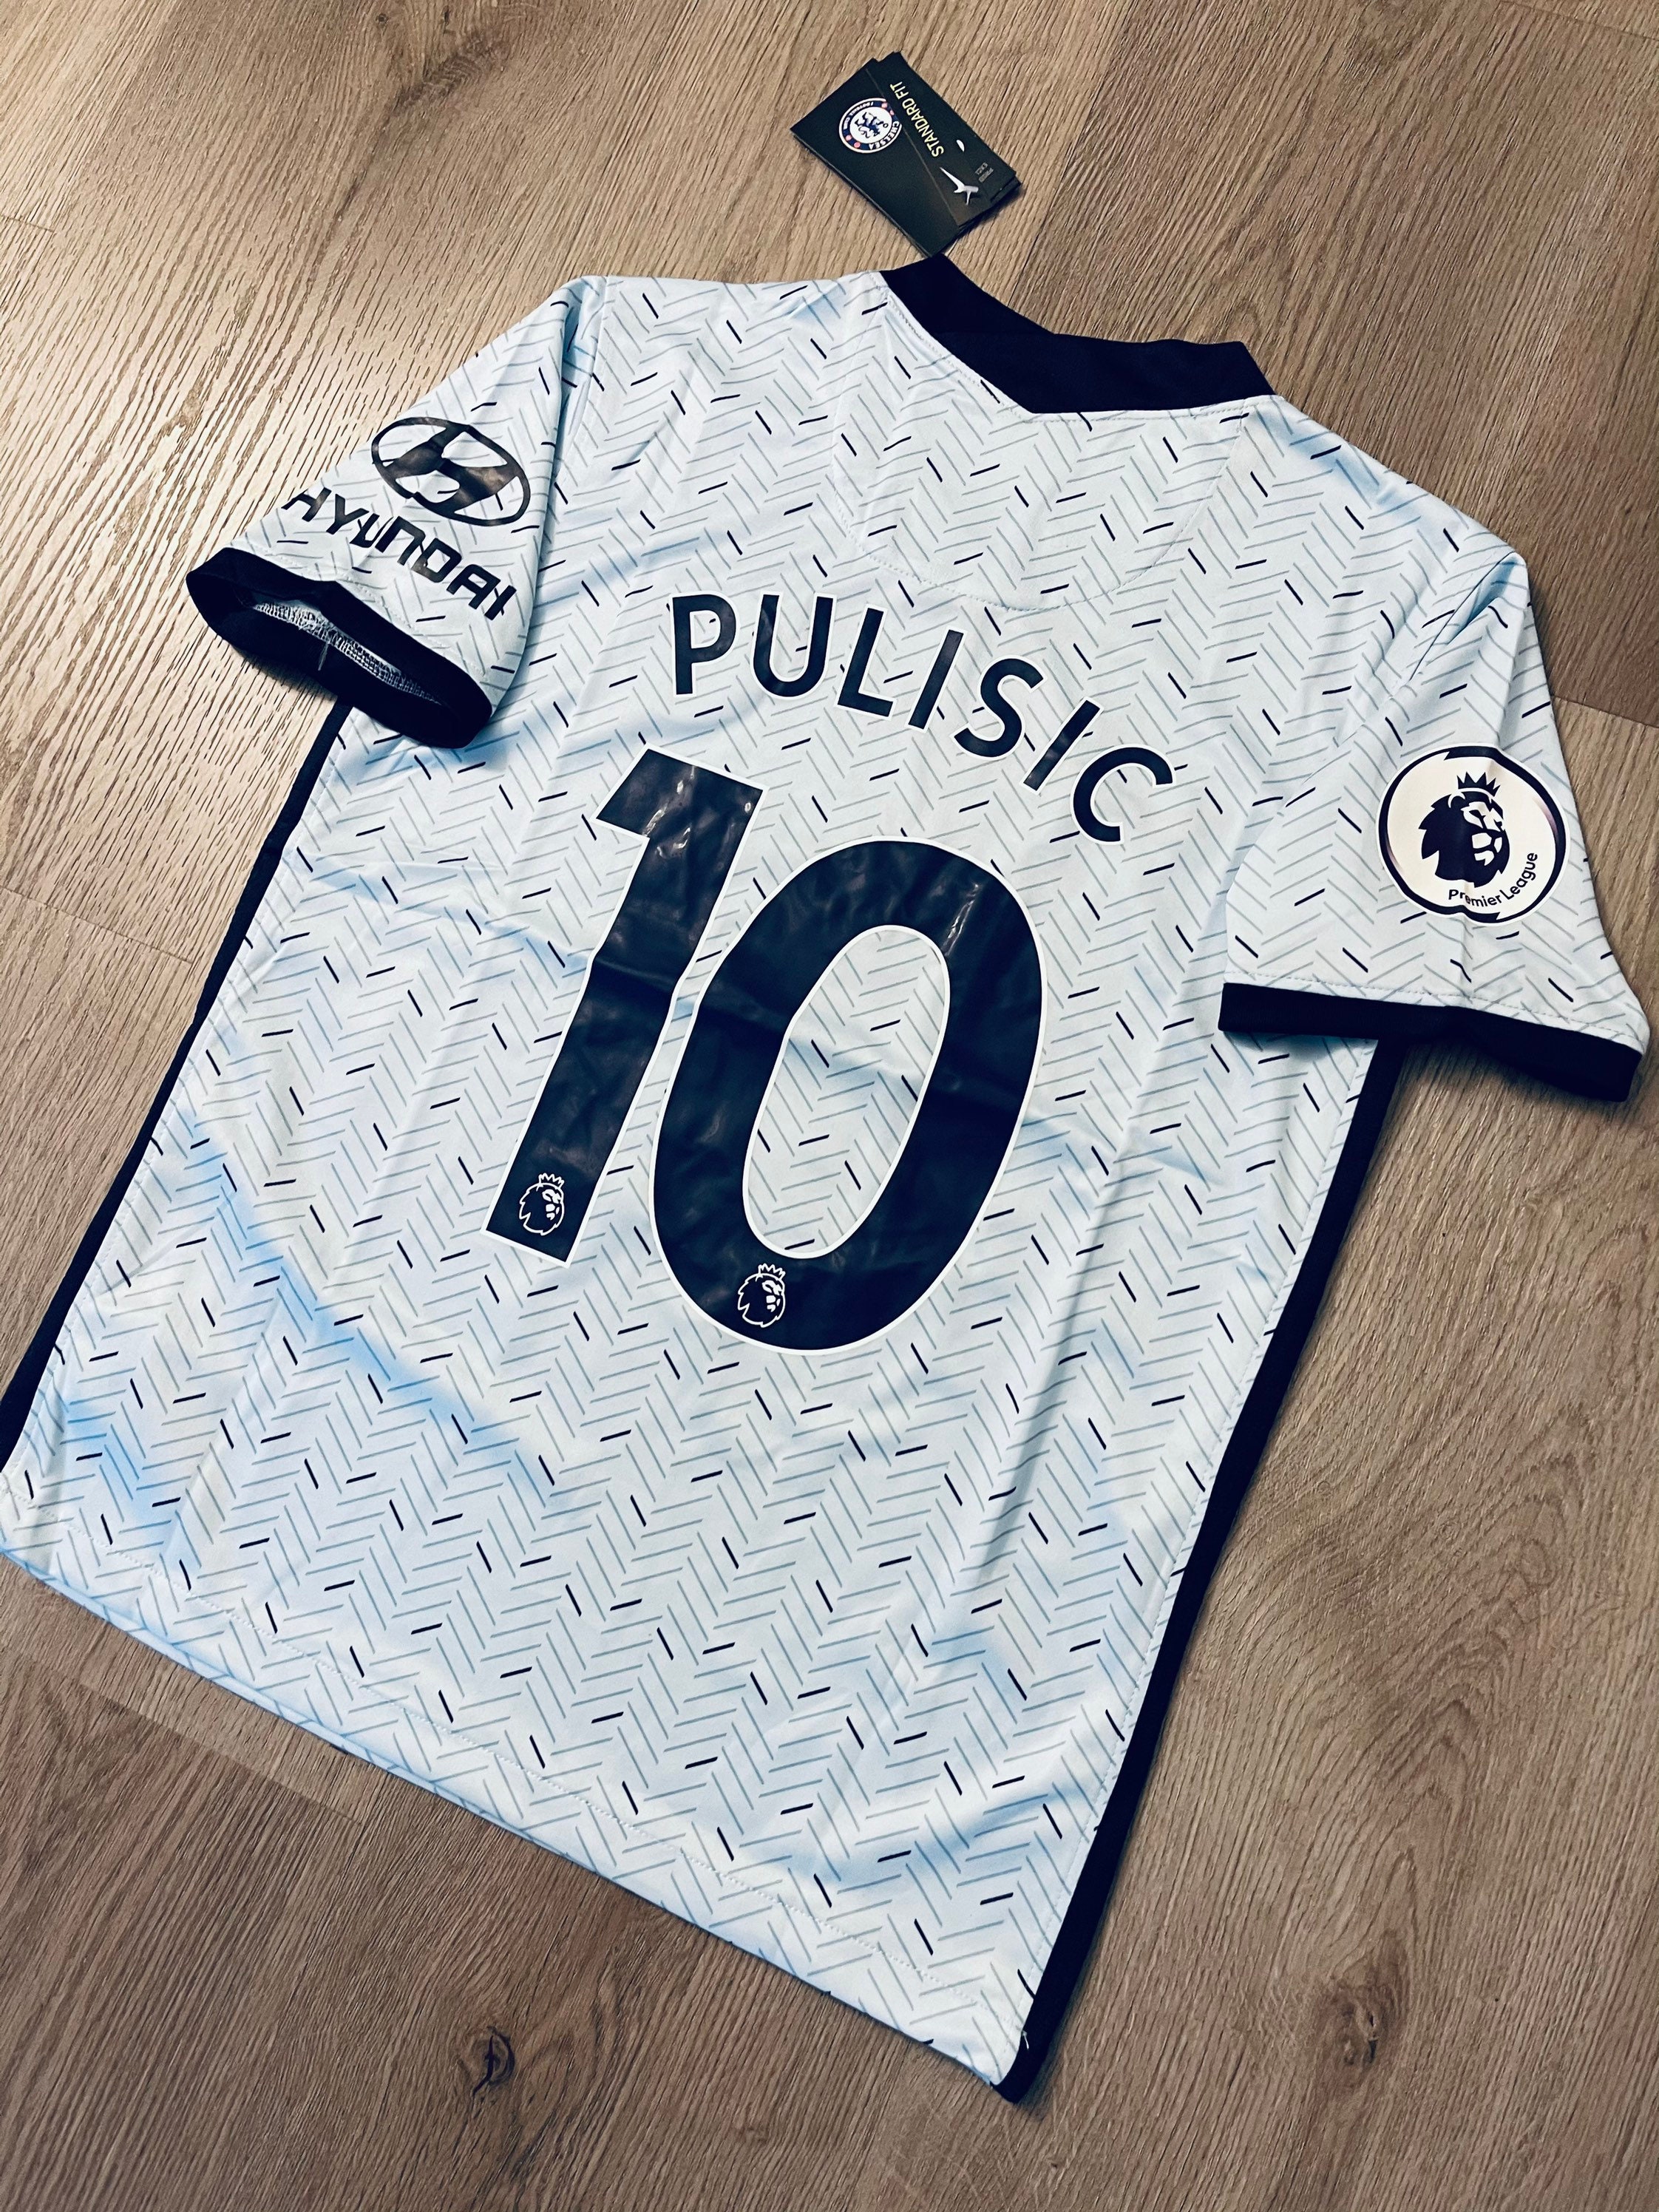 Pulisic 10 Chelsea away soccer jersey 20/21 | Etsy